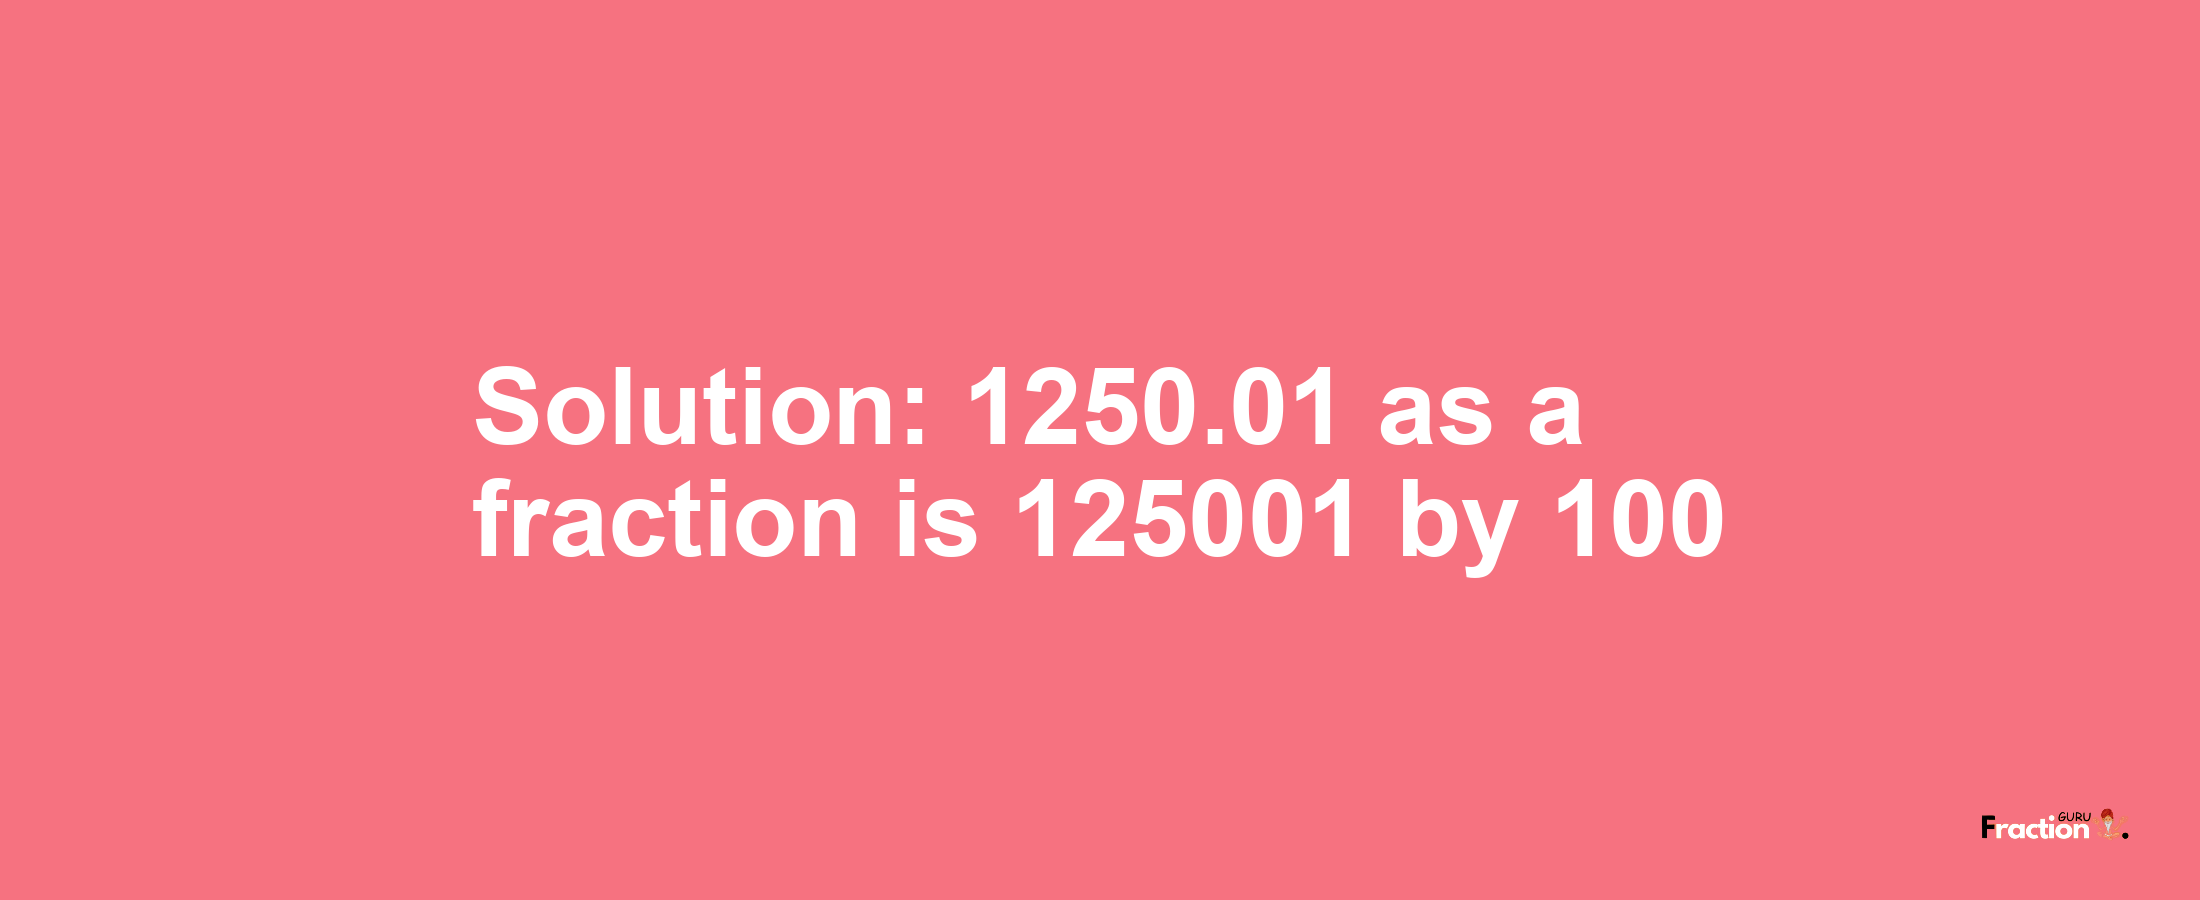 Solution:1250.01 as a fraction is 125001/100